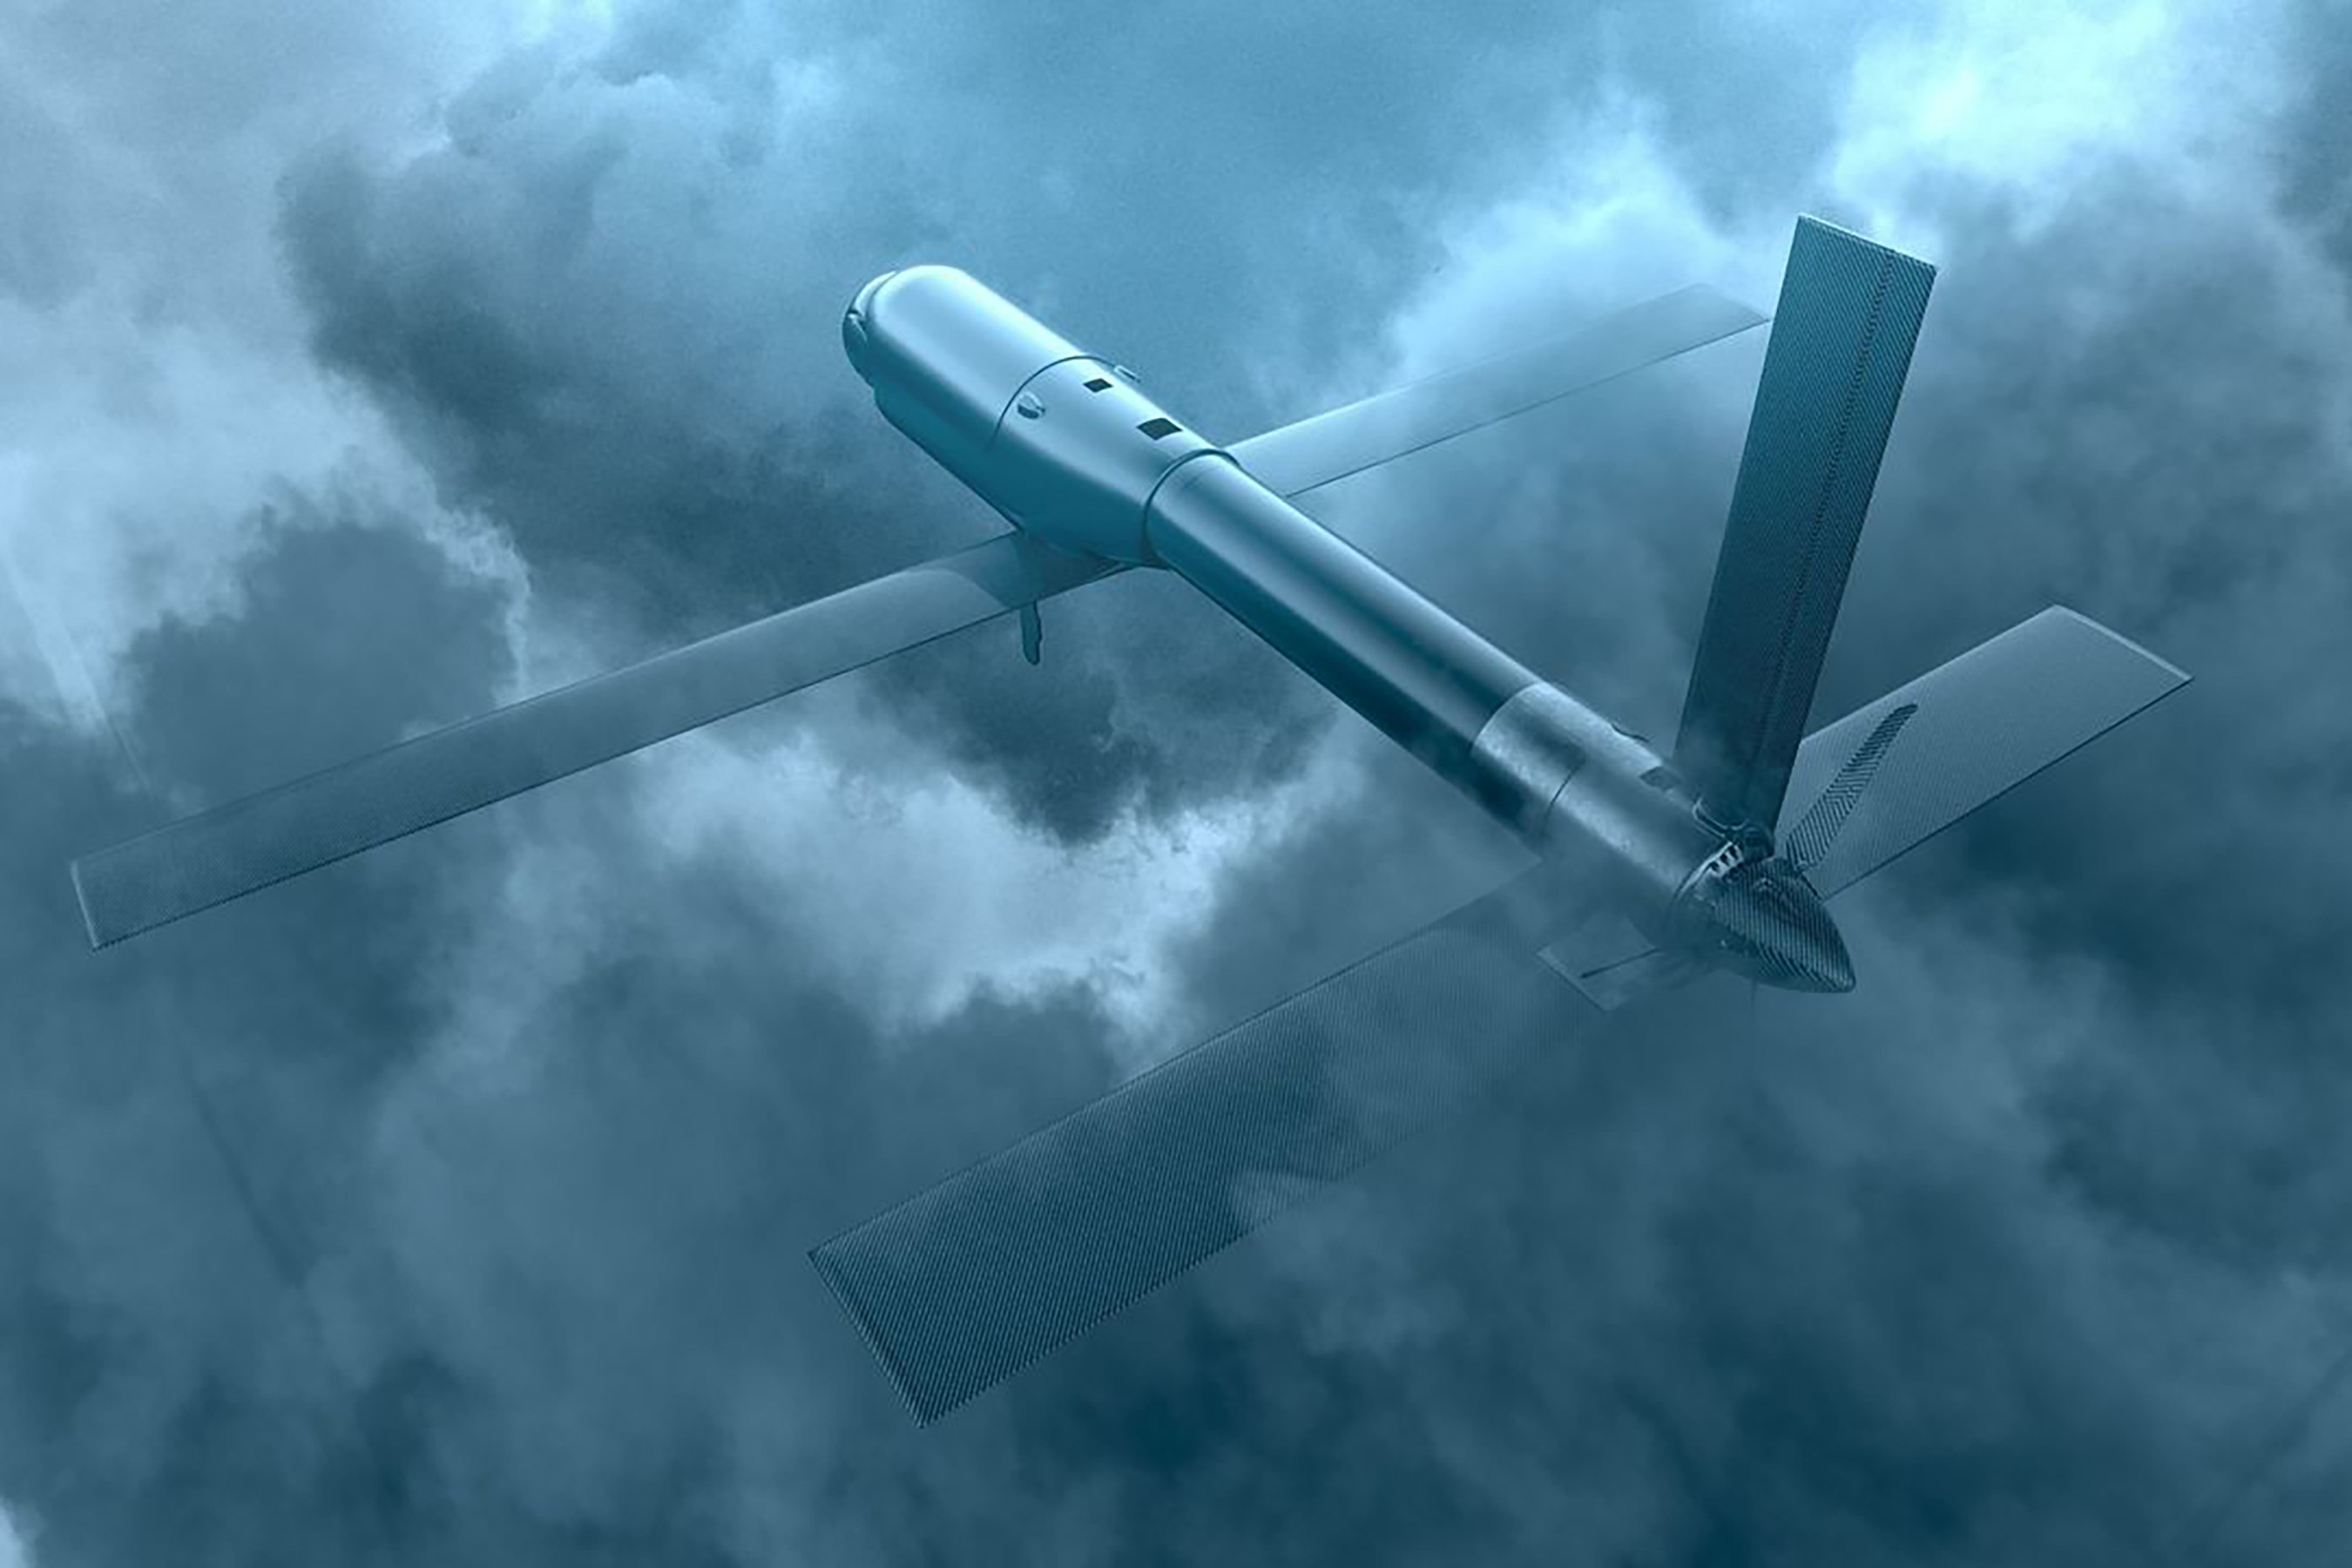 AeroVironment’s Switchblade 600 loitering munition is the only type of drone disclosed as being part of the initiative and is likely to be deployed in the Indo-Pacific region. Photo: AeroVironment